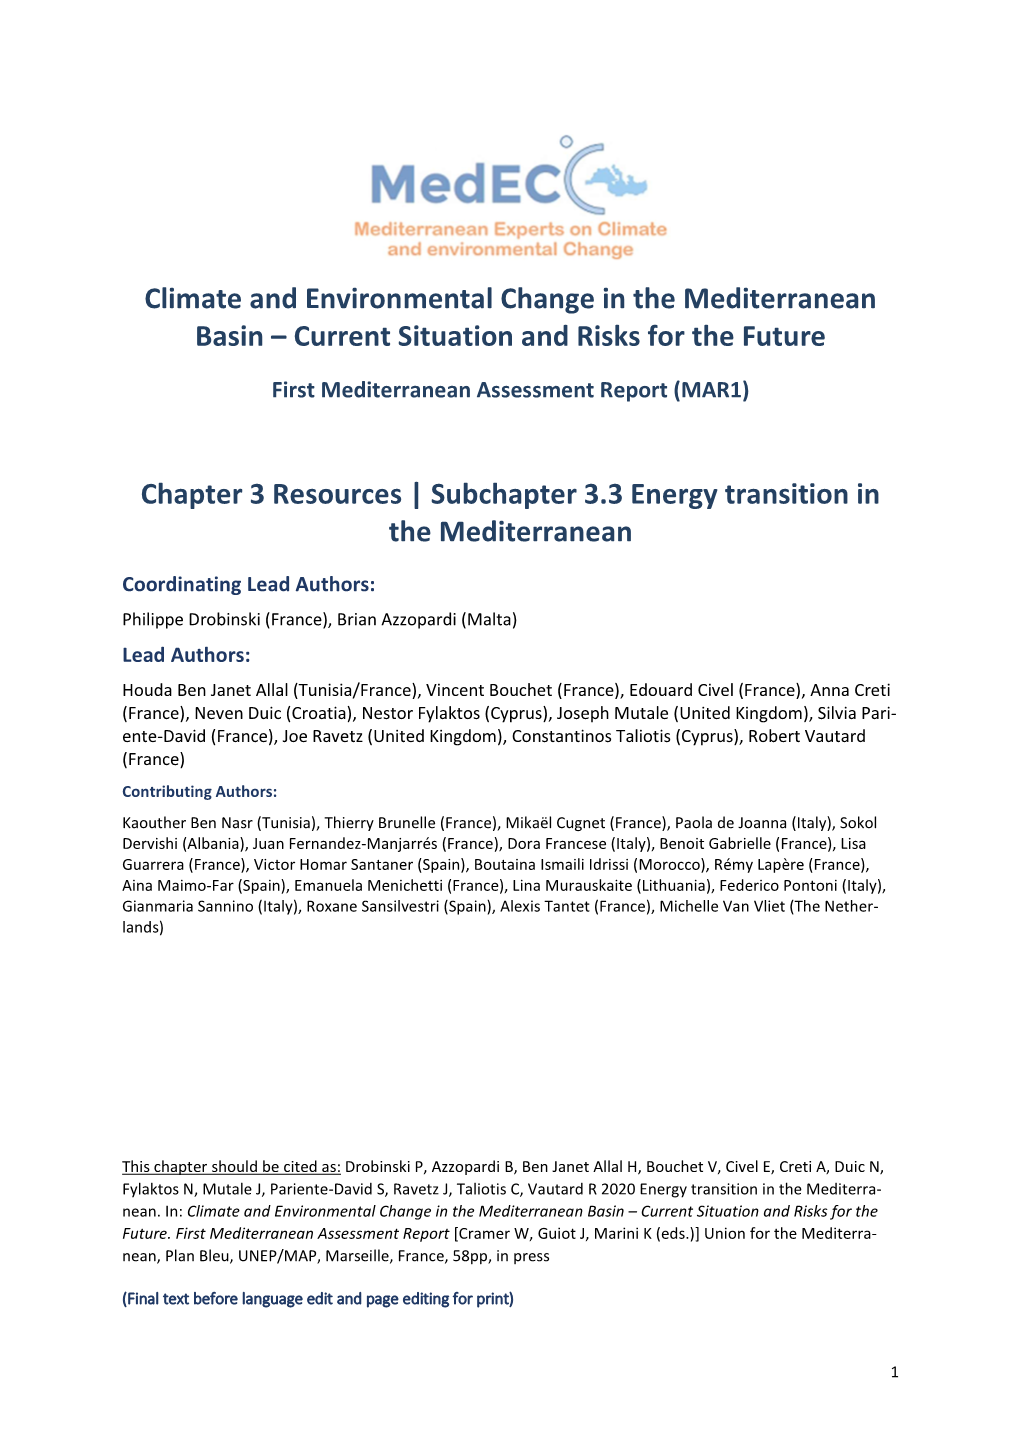 Climate and Environmental Change in the Mediterranean Basin – Current Situation and Risks for the Future